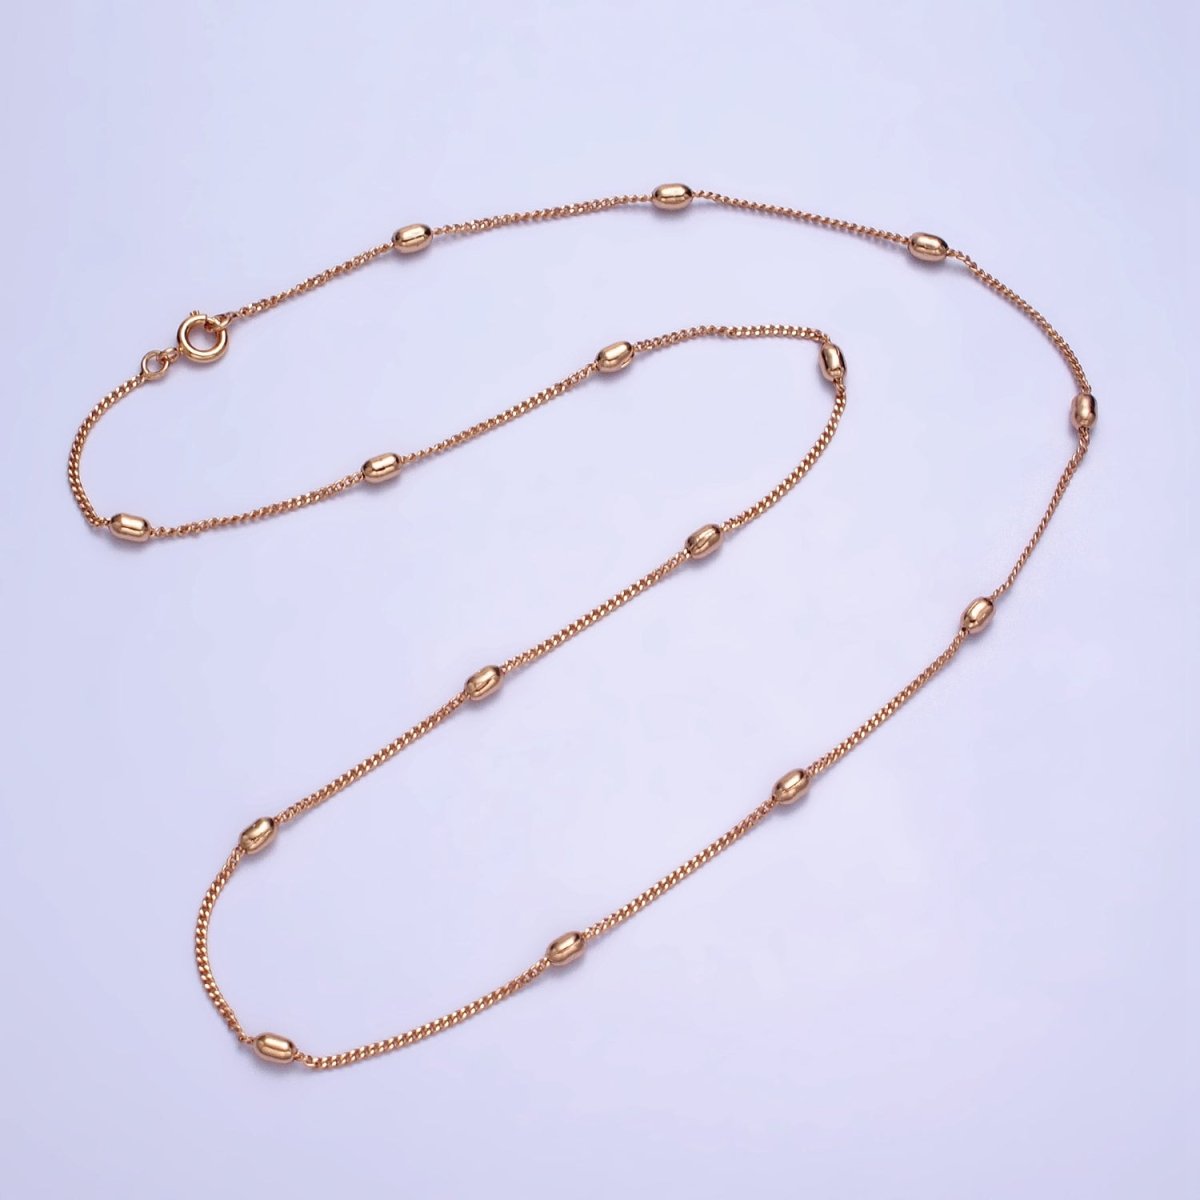 19.75 Inch Satellite Chain 18K Gold Filled Dainty Beaded Chain Necklace | WA-1602 Clearance Pricing - DLUXCA